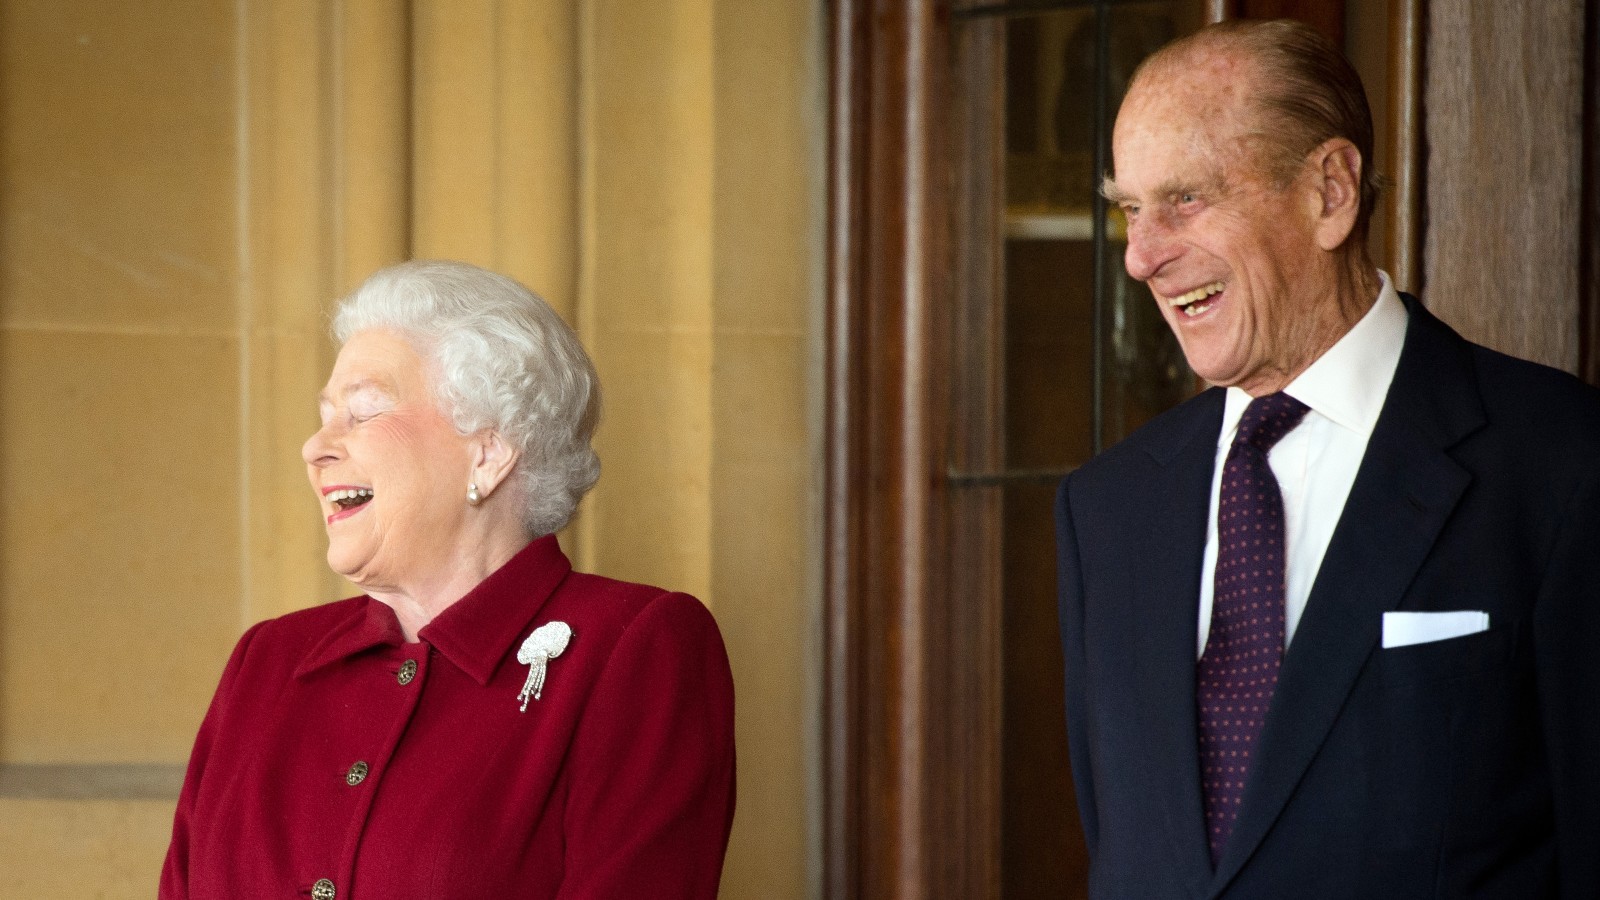 Queen’s sassy response - Prince Philip was banned from the most popular department store, but the Queen kept shopping there